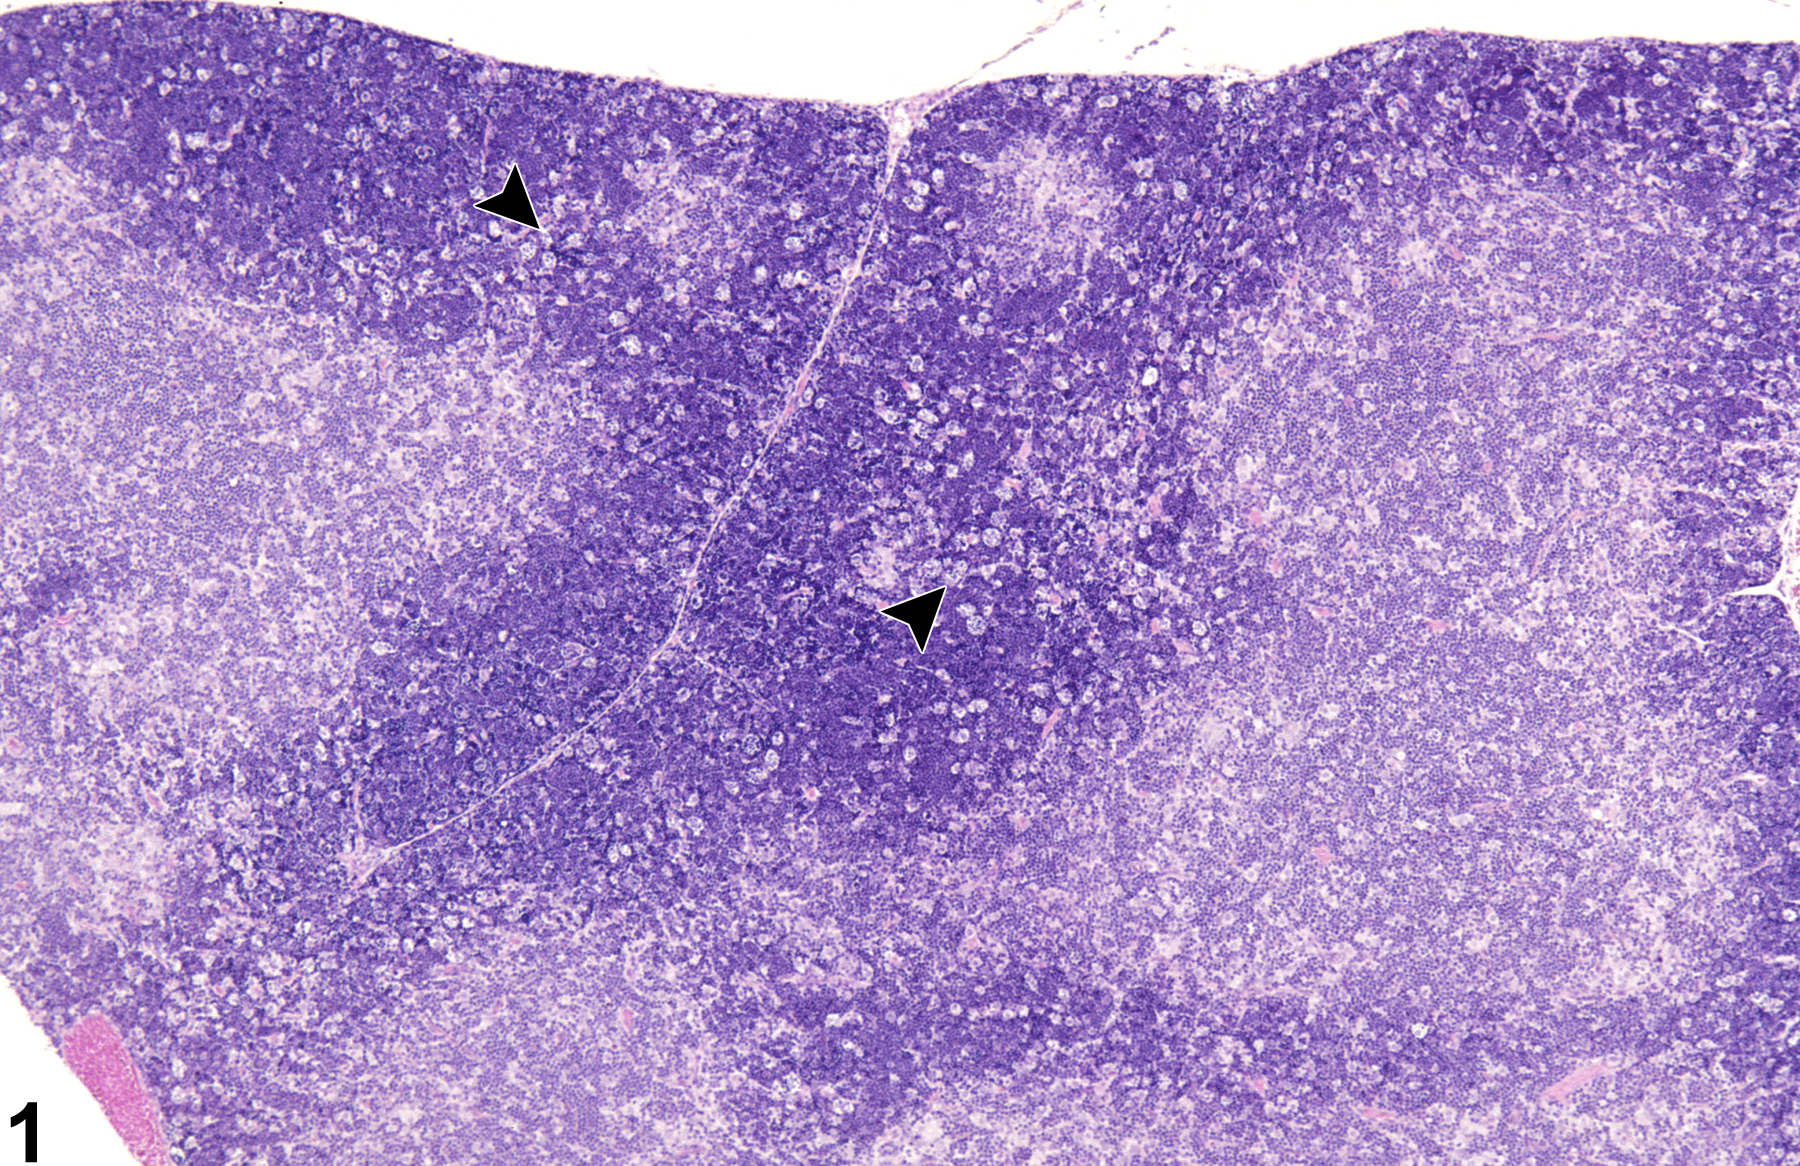 Image of apoptosis, lymphocyte in the thymus from a female B6C3F1/N mouse in a subchronic study